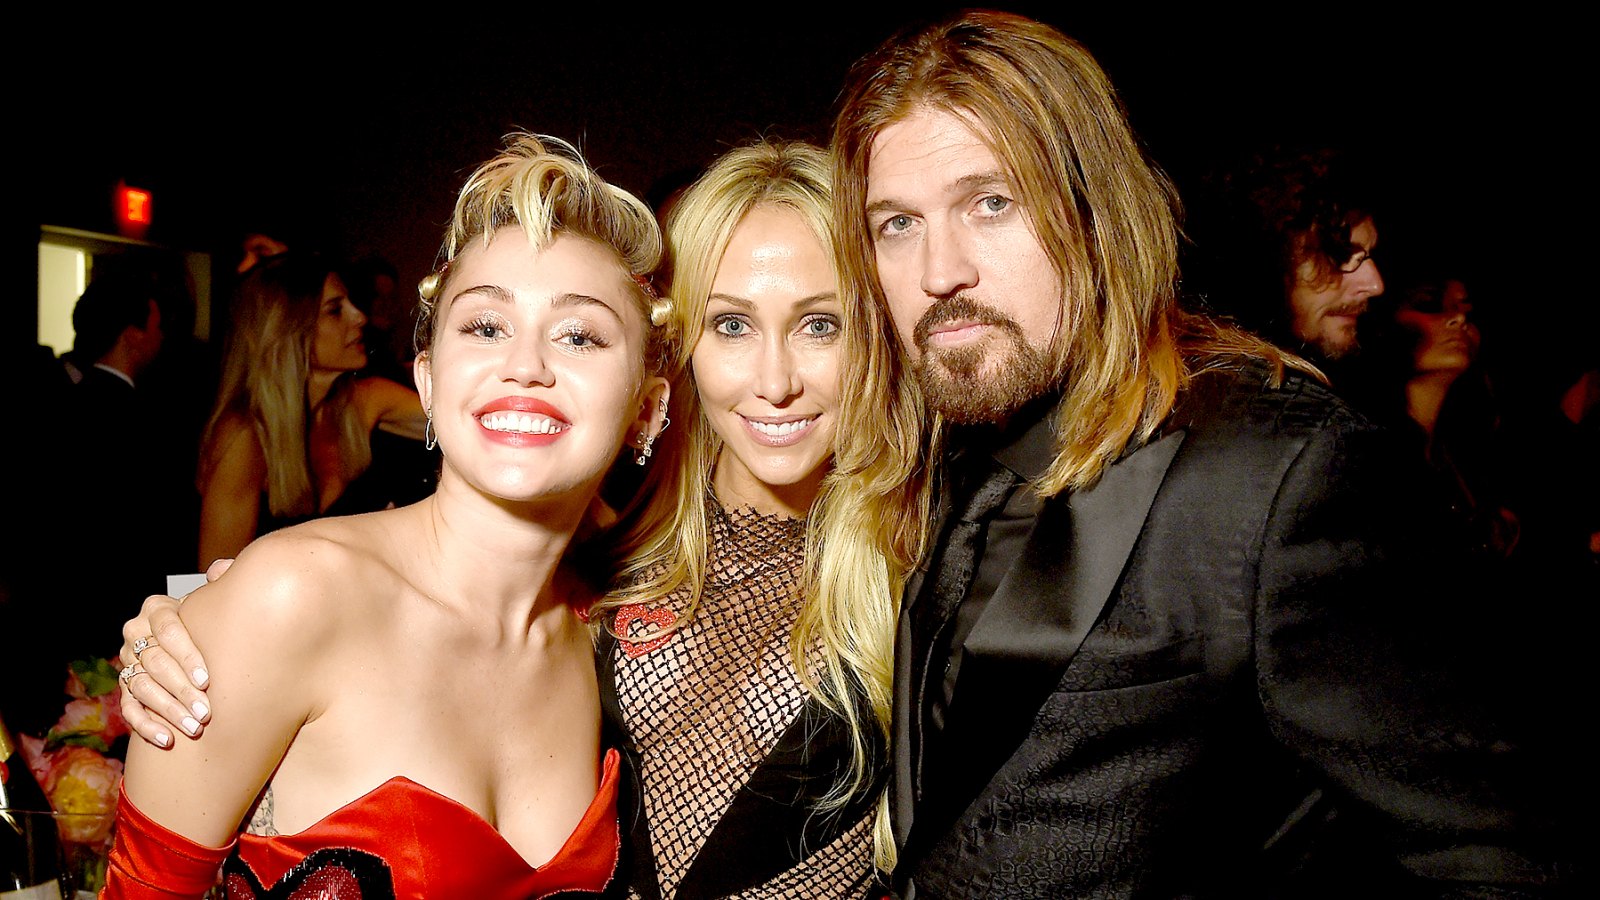 Miley Cyrus, Tish Cyrus and Billy Ray Cyrus attend the 2015 amfAR Inspiration Gala New York at Spring Studios on June 16, 2015 in New York City.